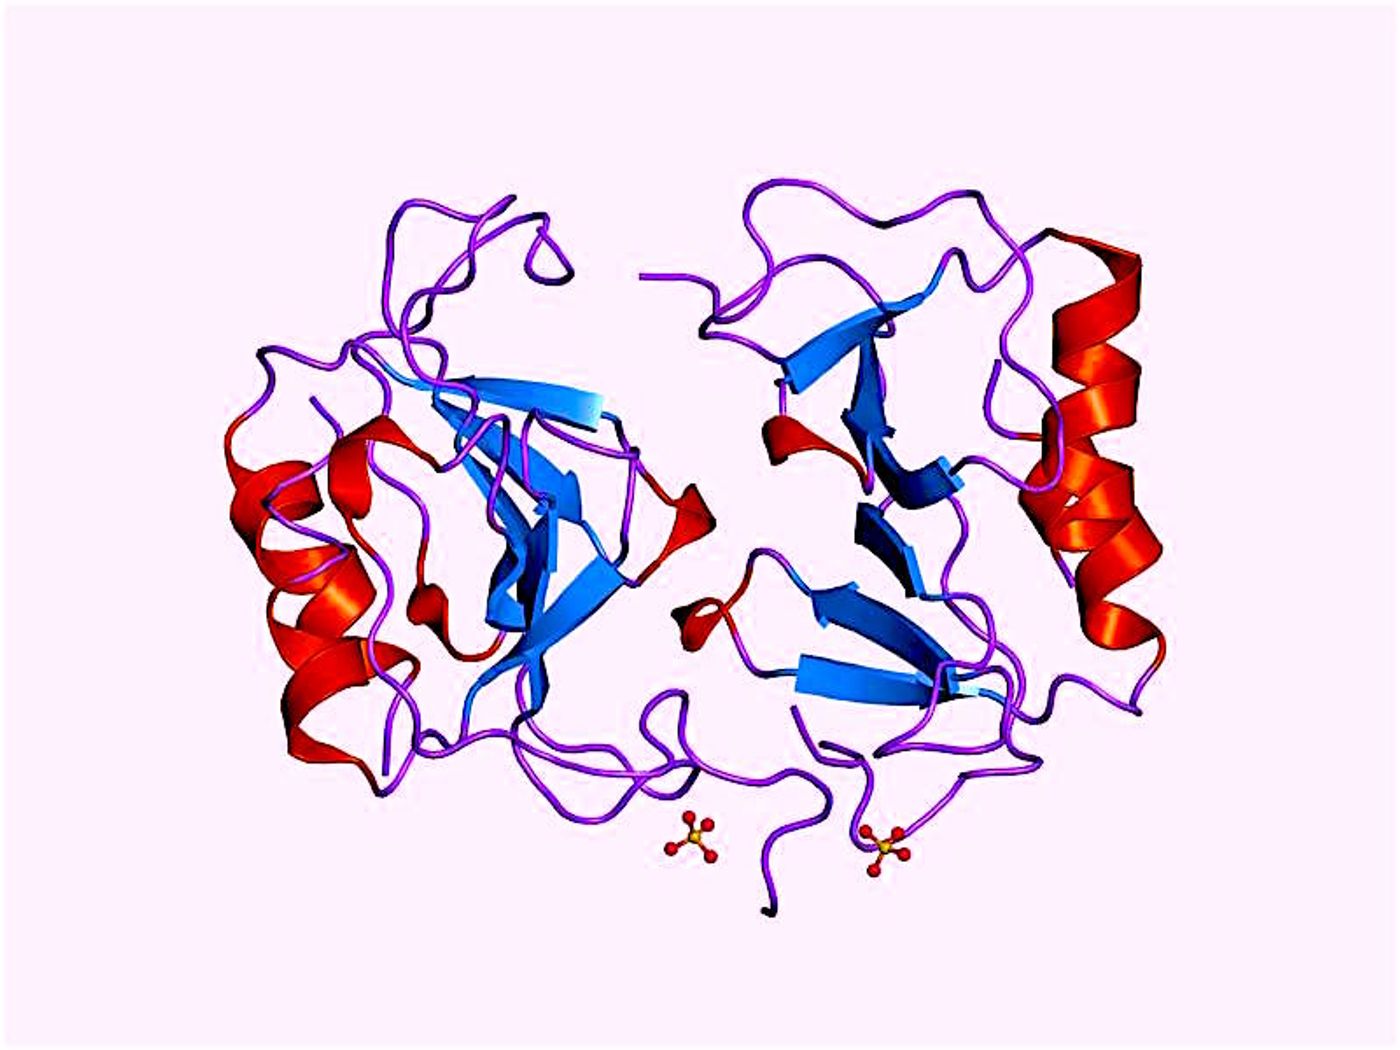 The CXCL10 protein is shown here.